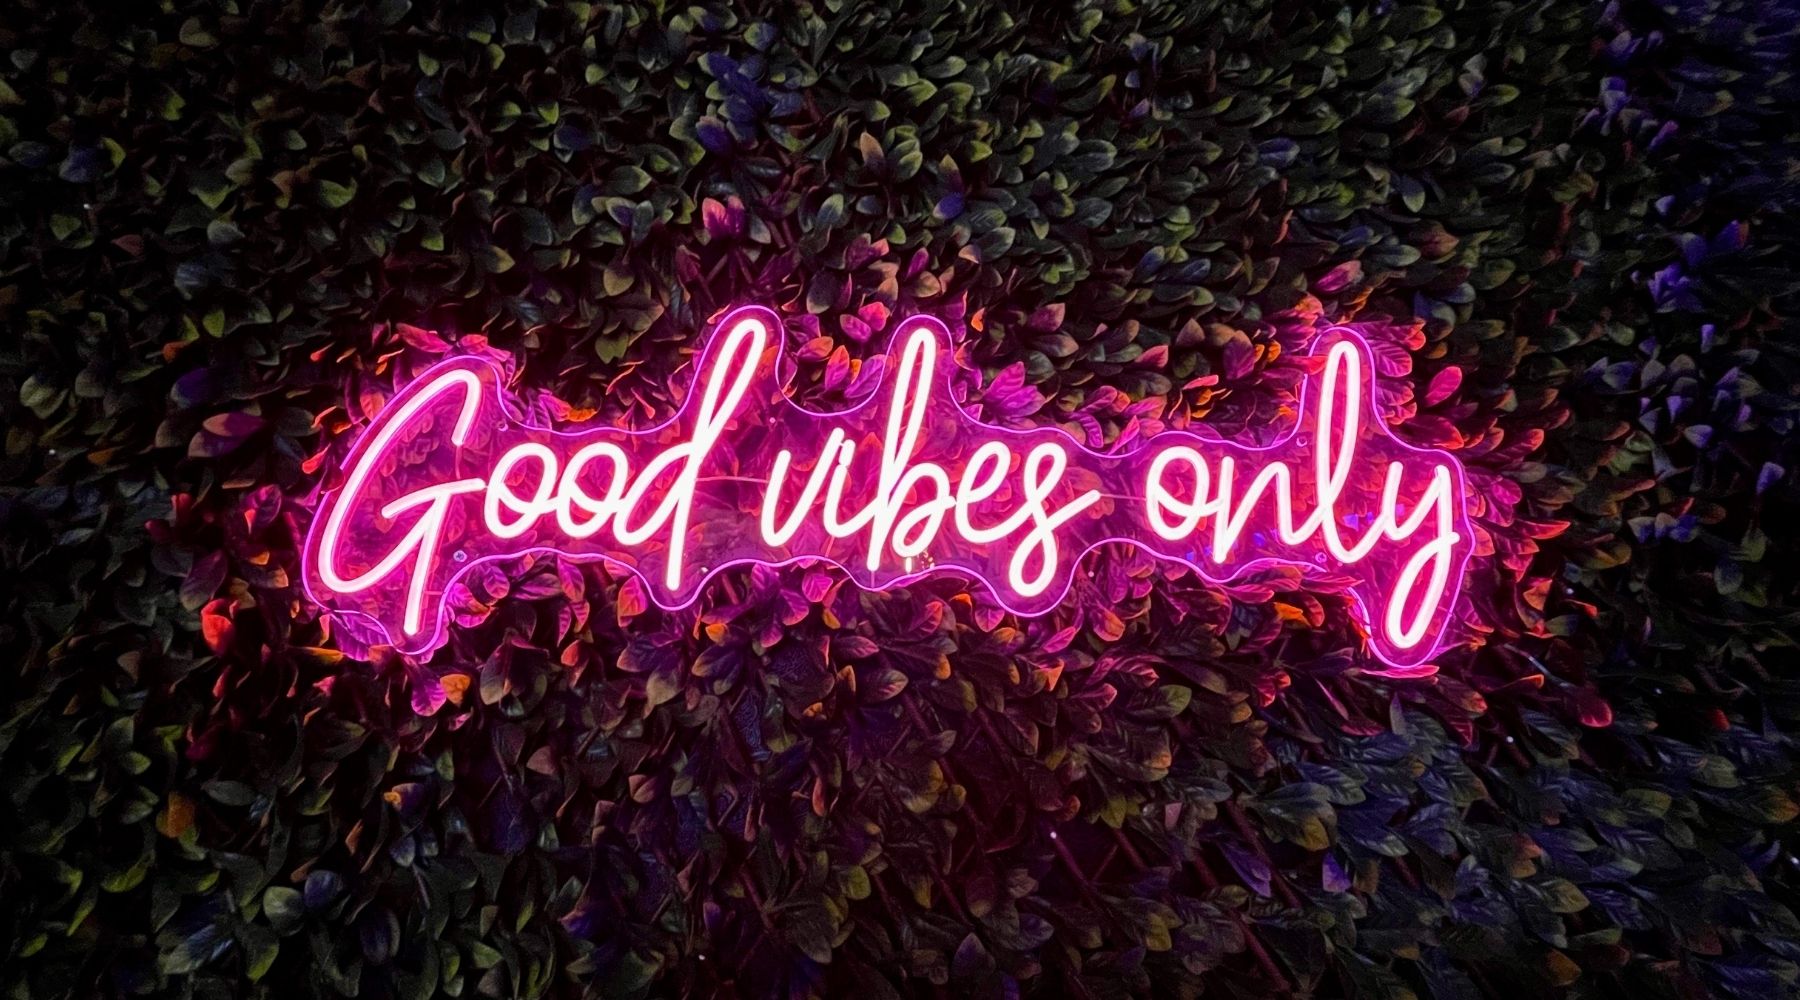 The Best Quotes and Sayings for Custom Neon Signs in Home Decor